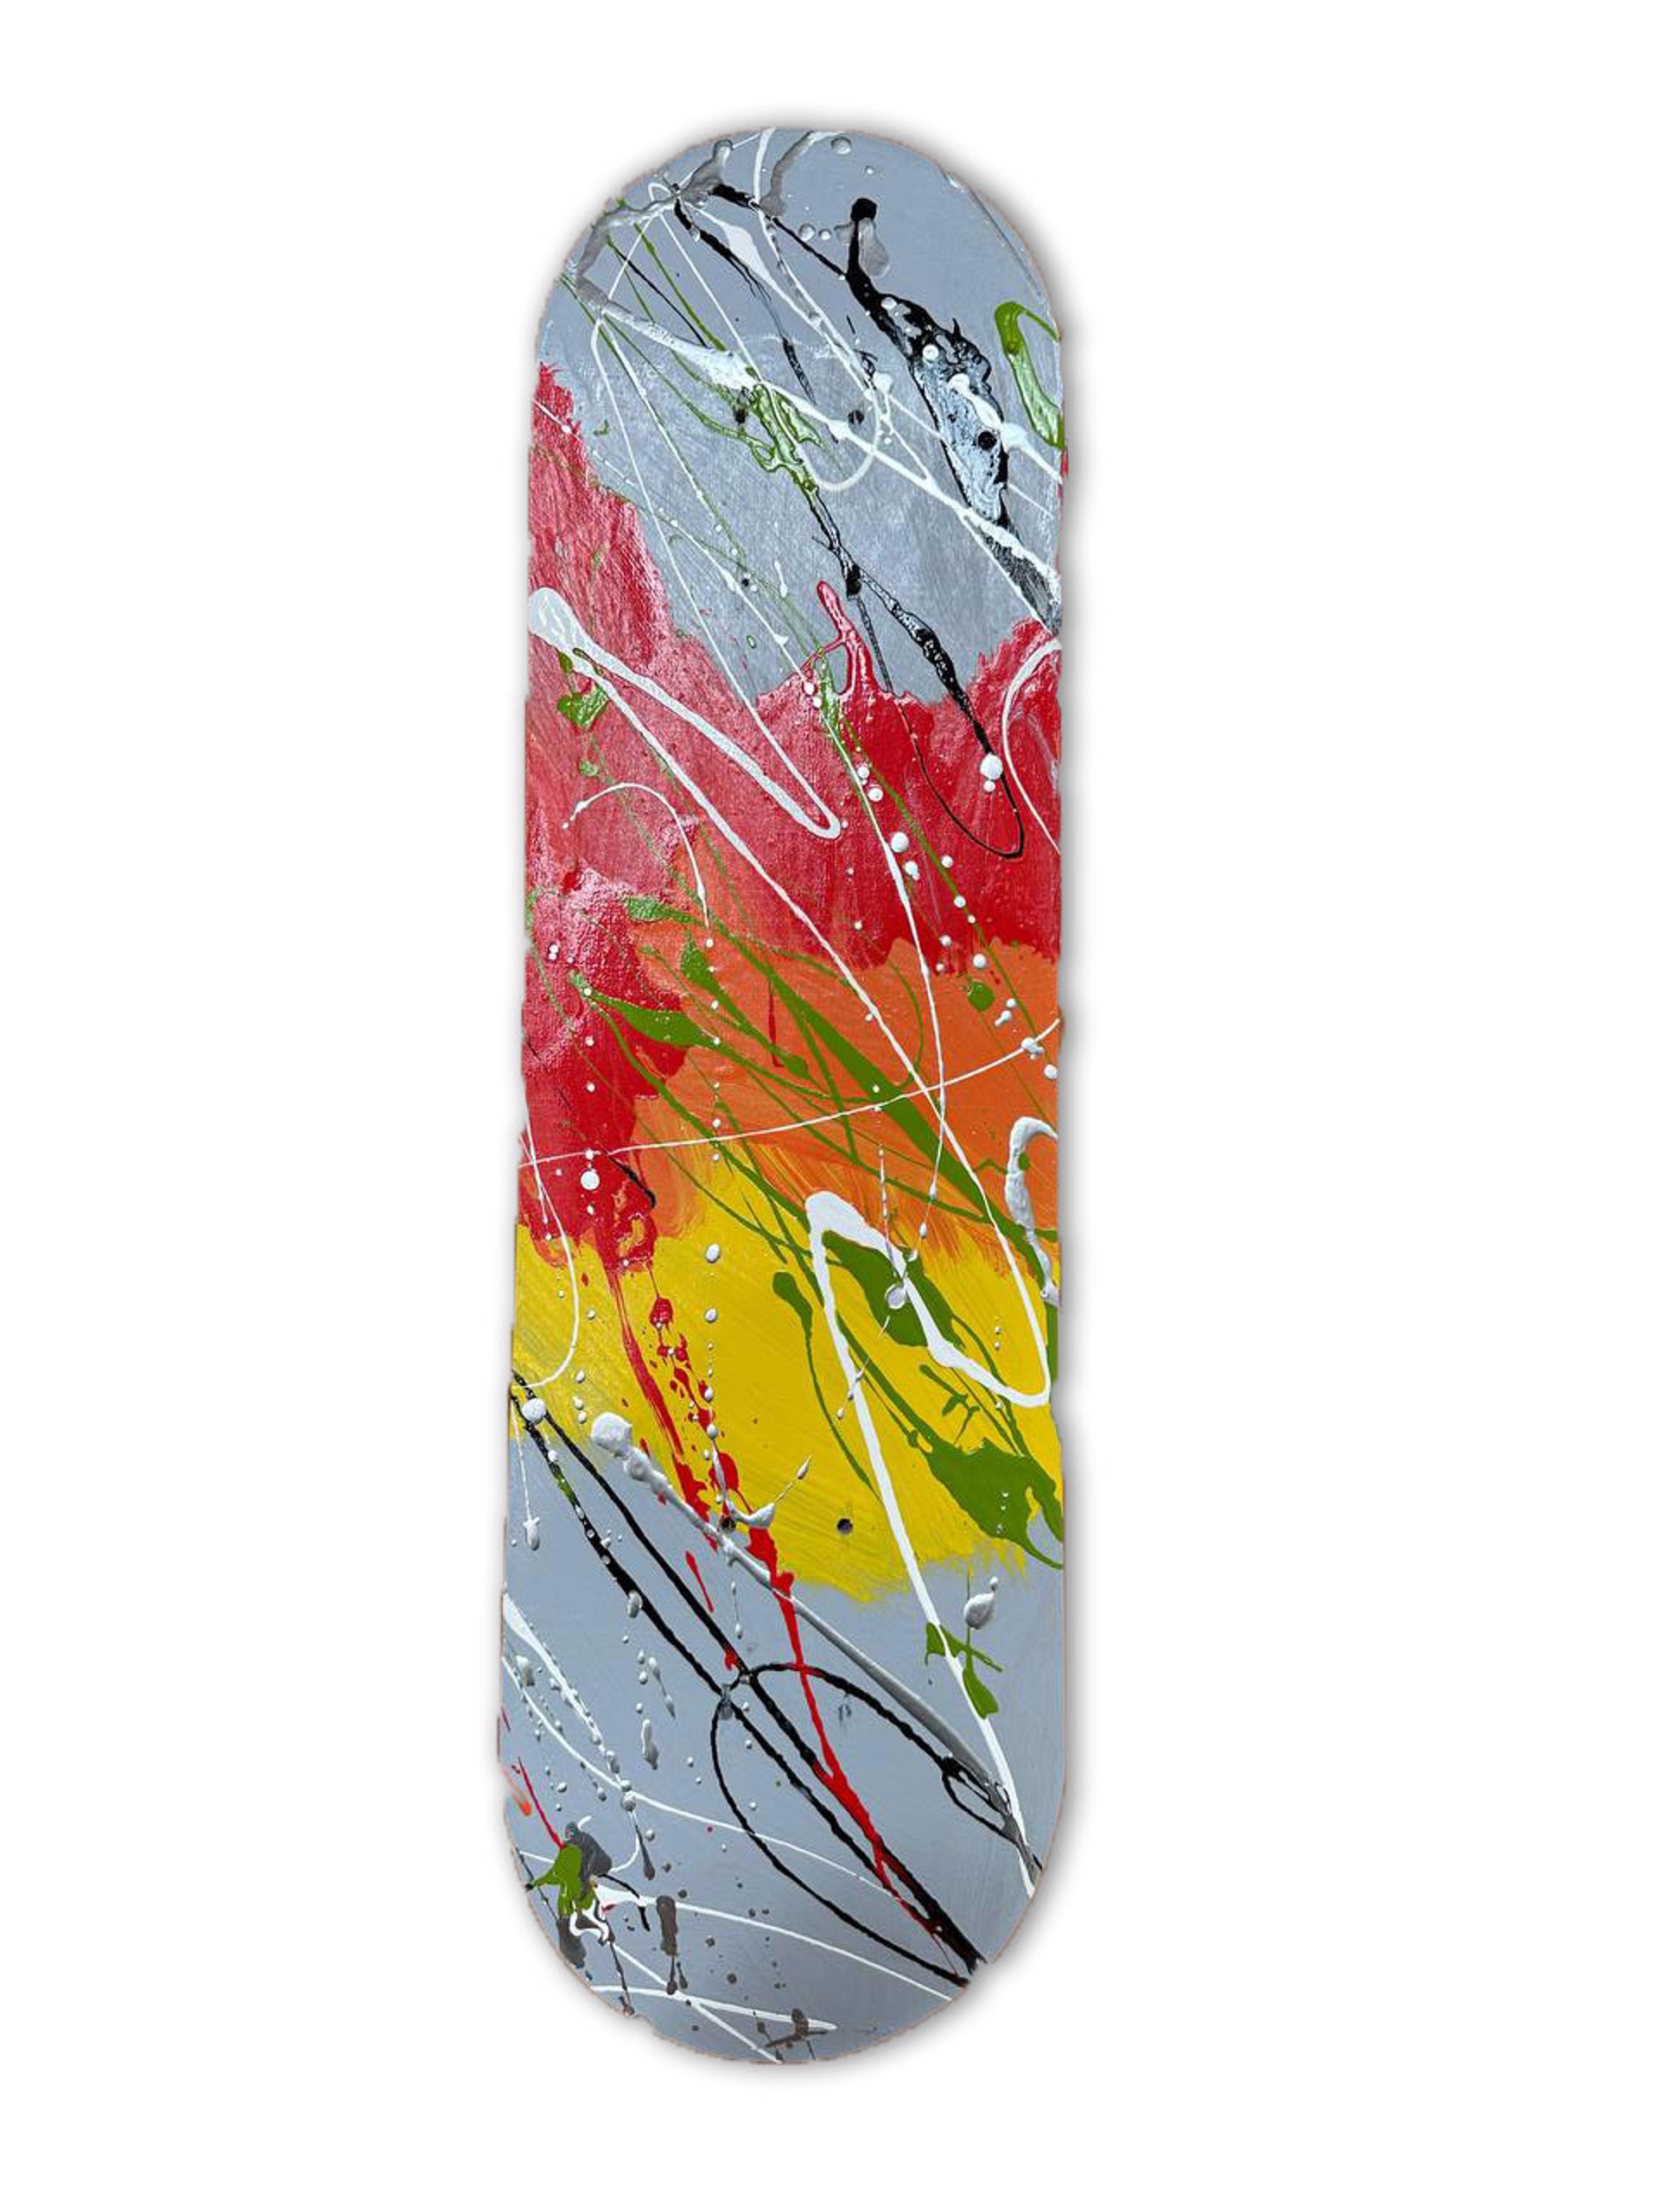 "Abstract Skateboard IV (Red Orange Yellow)" by Abstract Skateboards Wall Sculptures by Elena Bulatova